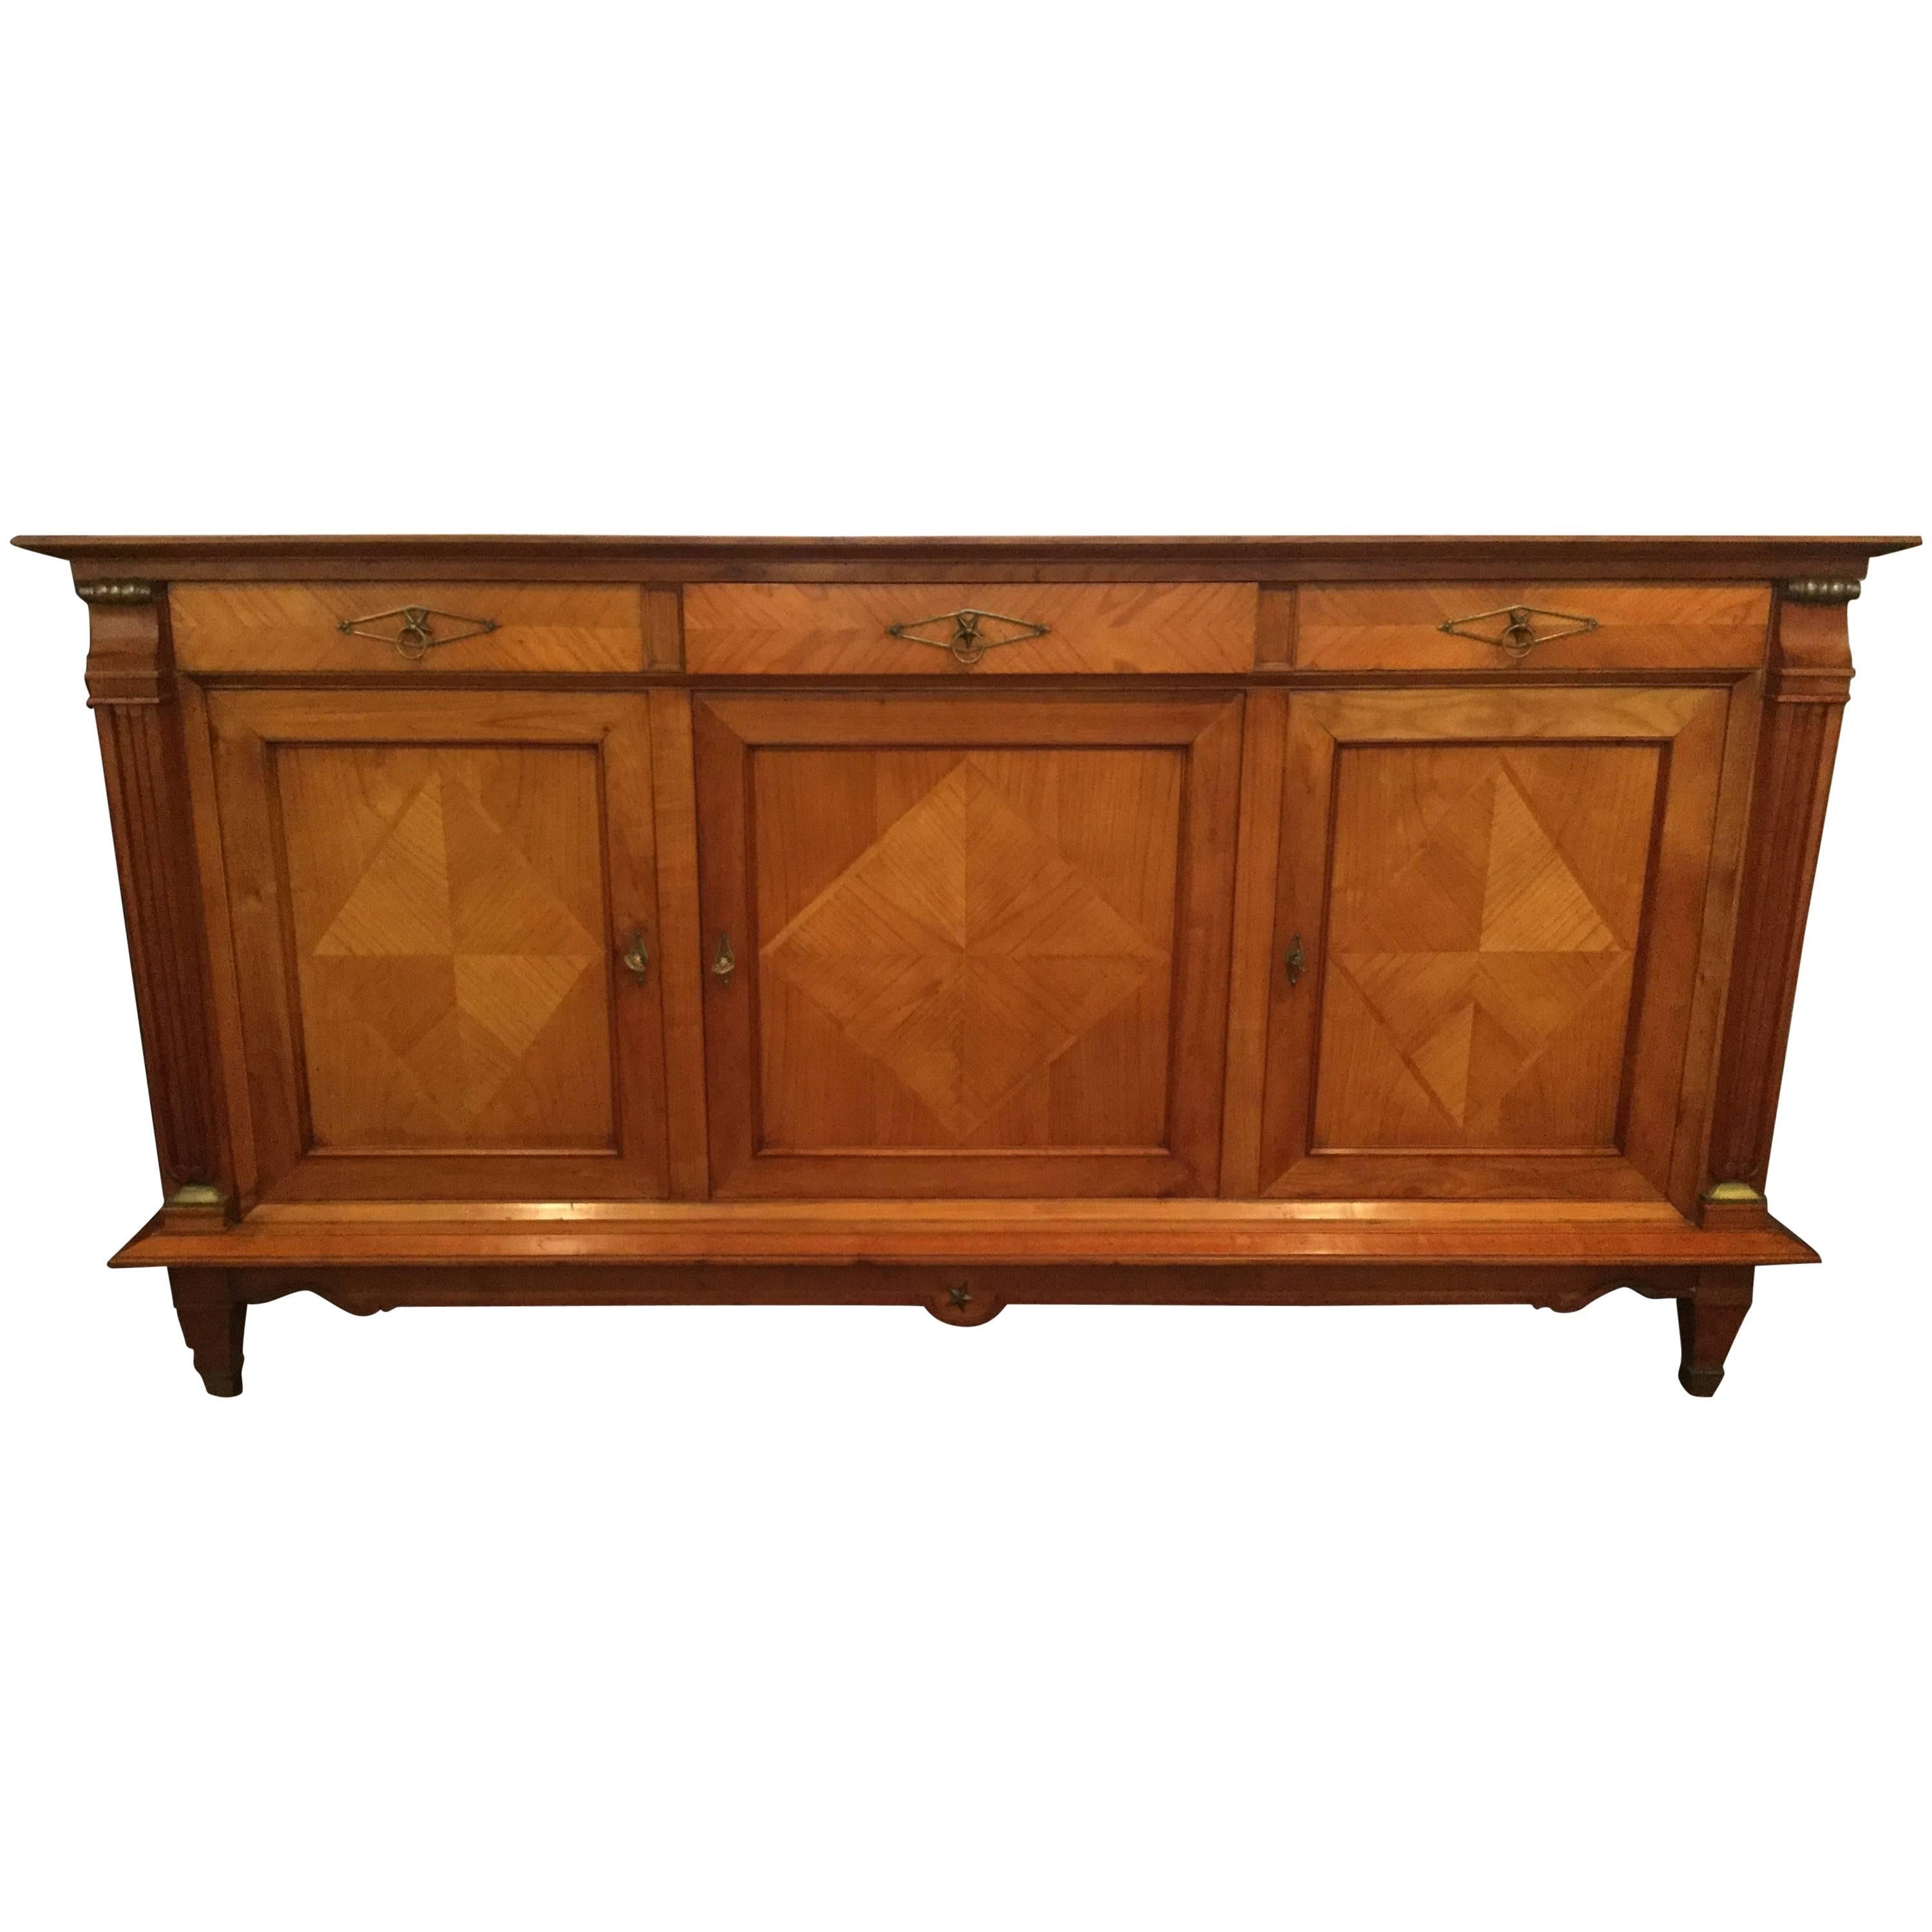 Handsome French Directoire Cherry Credenza Sideboard